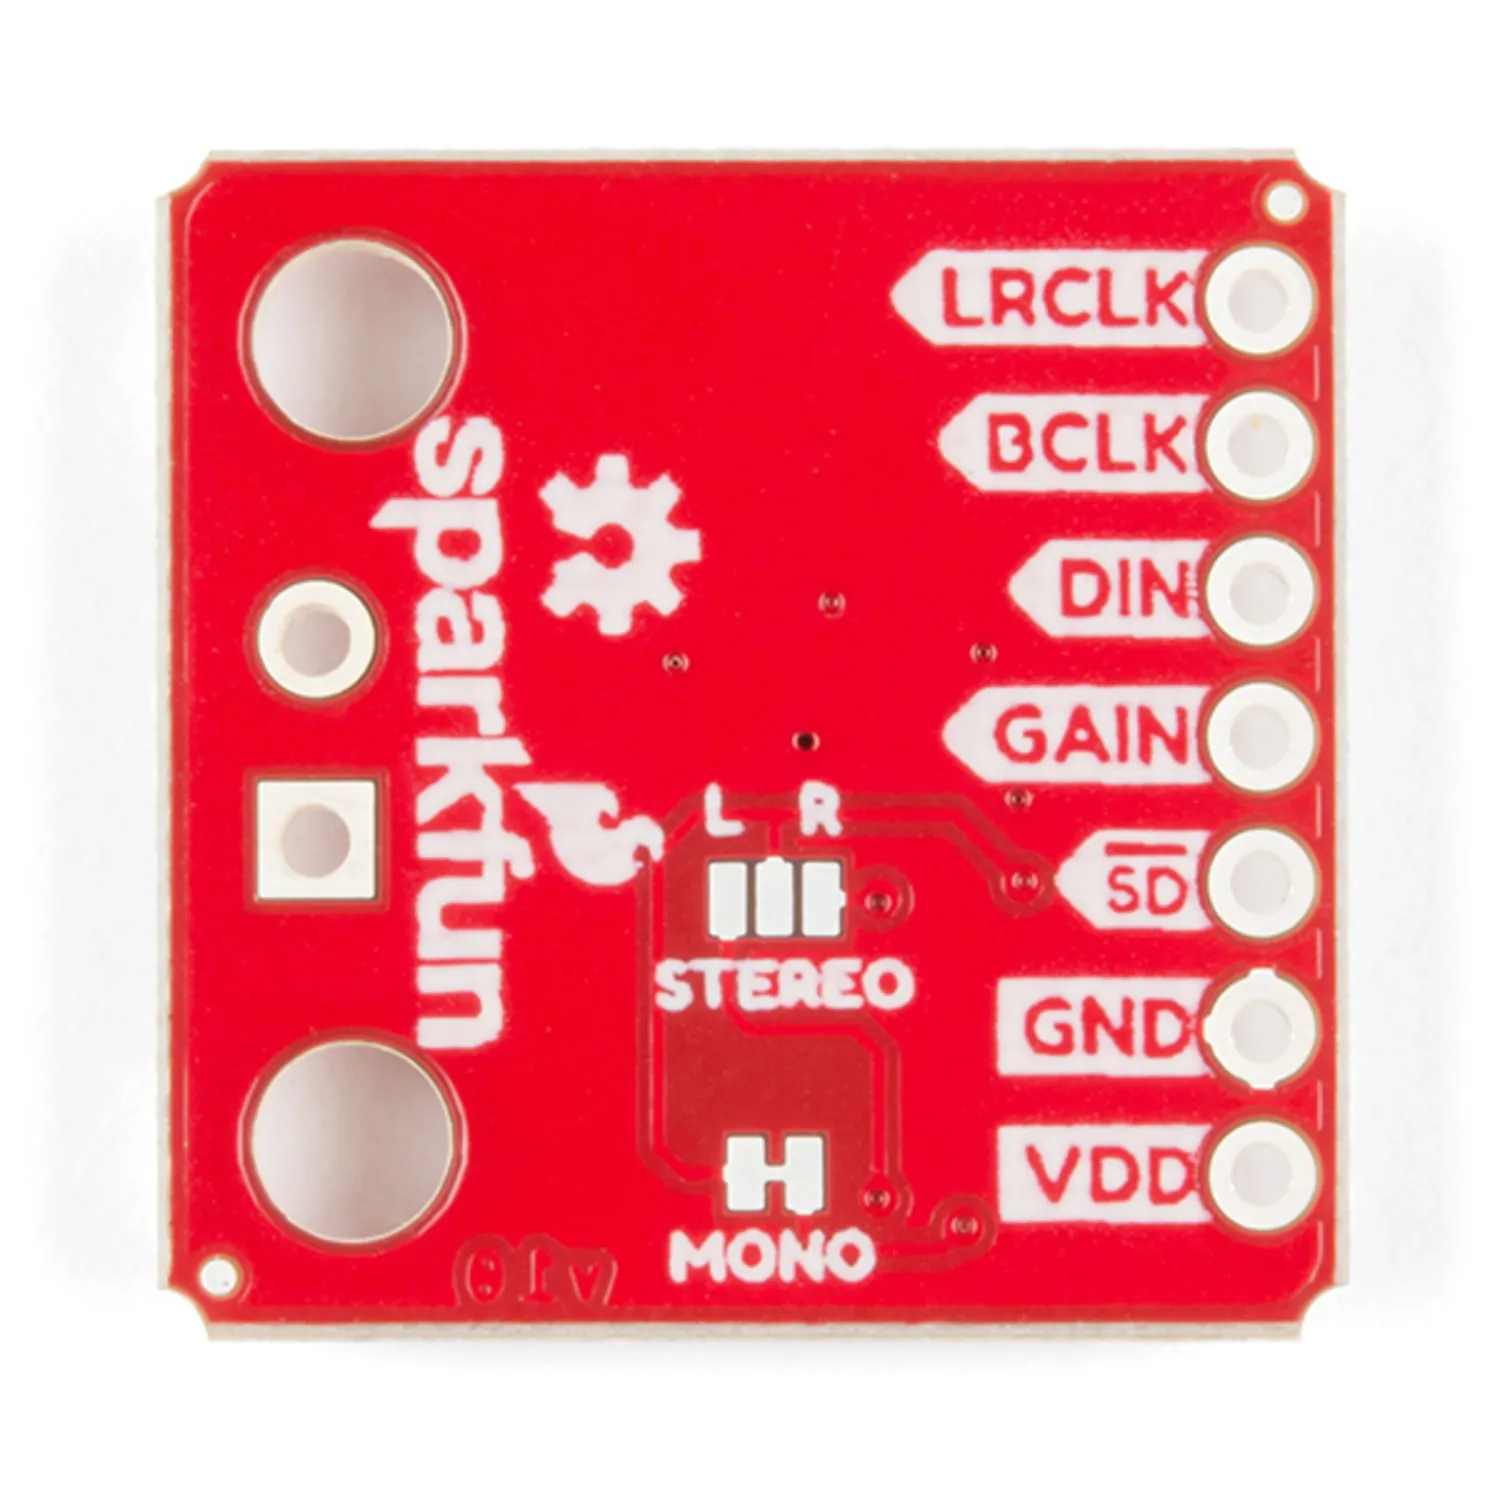 Photo of SparkFun I2S Audio Breakout - MAX98357A